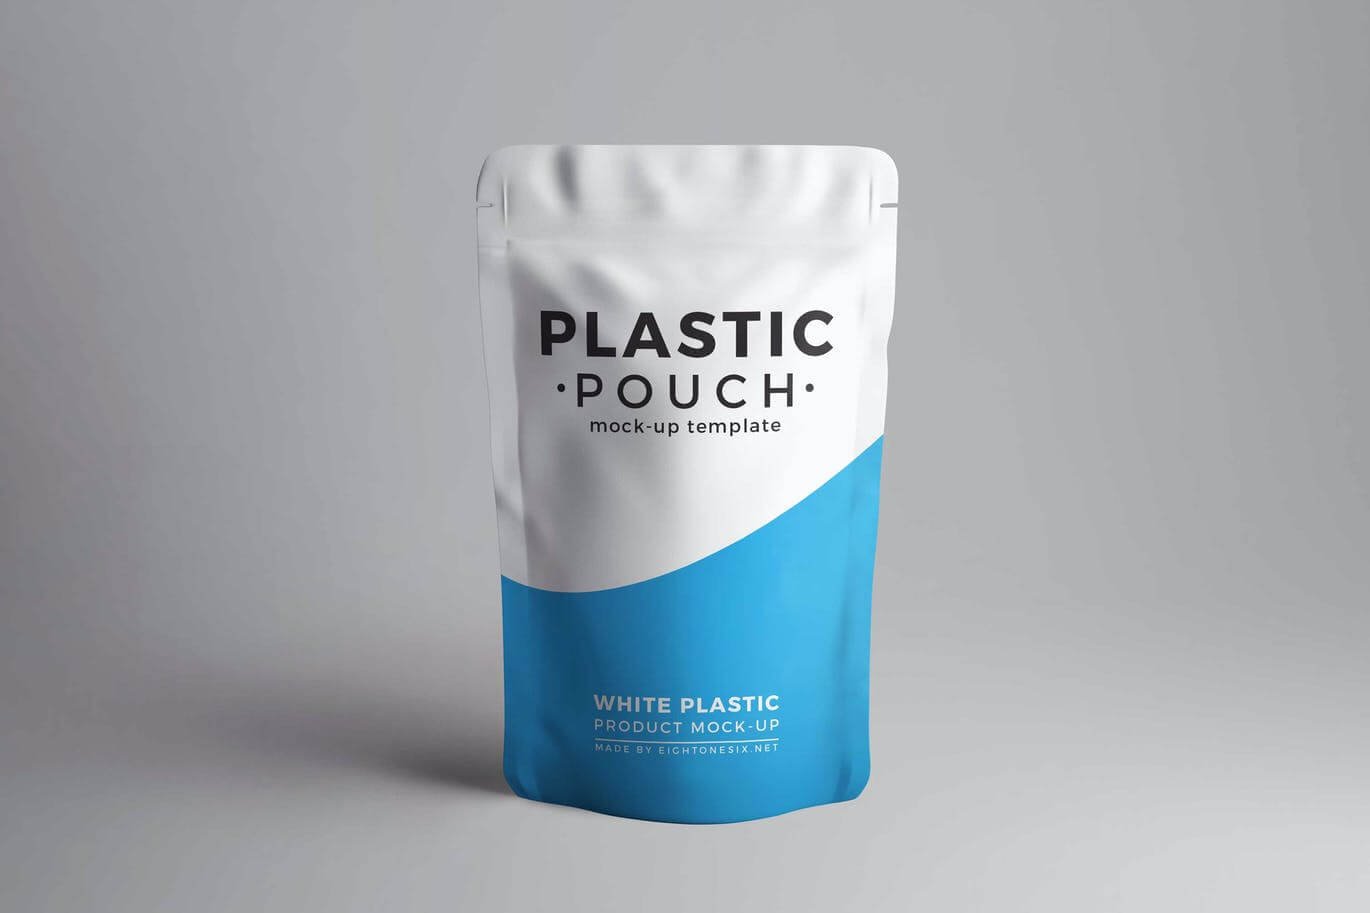 Plastic Pouch Product Mock-Up (1)